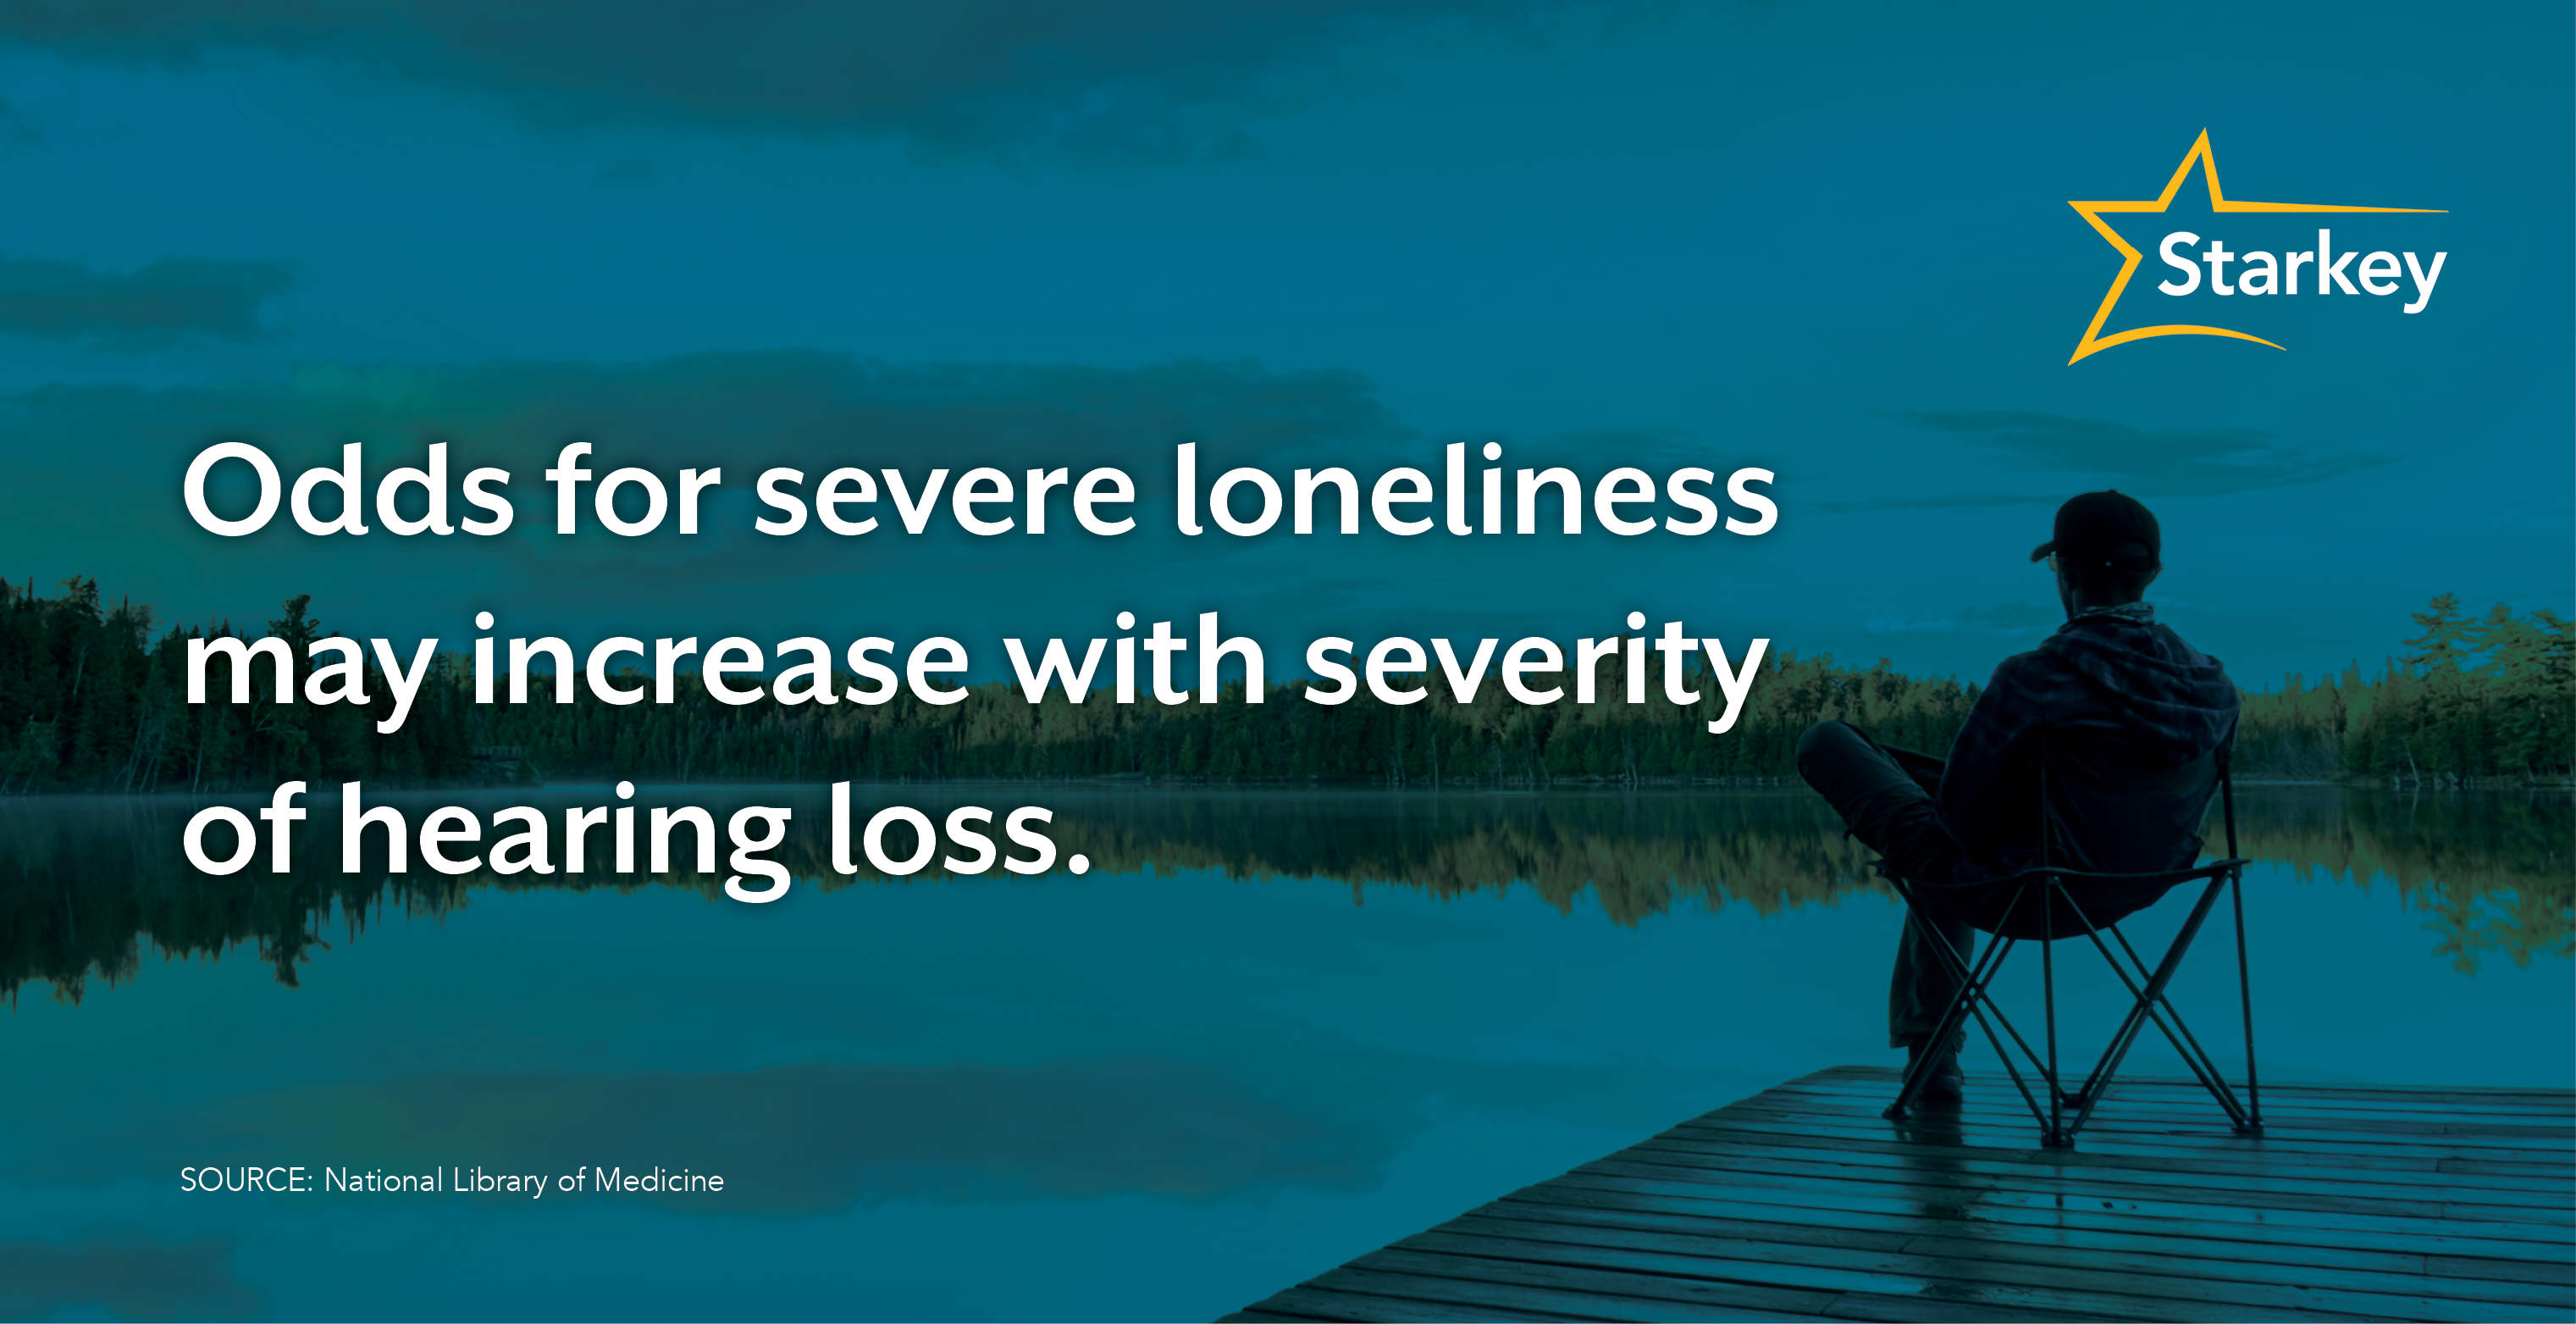 Image of man on a dock staring out into a lake beside text that reads, "Odds for severe loneliness may increase with severity of hearing loss."